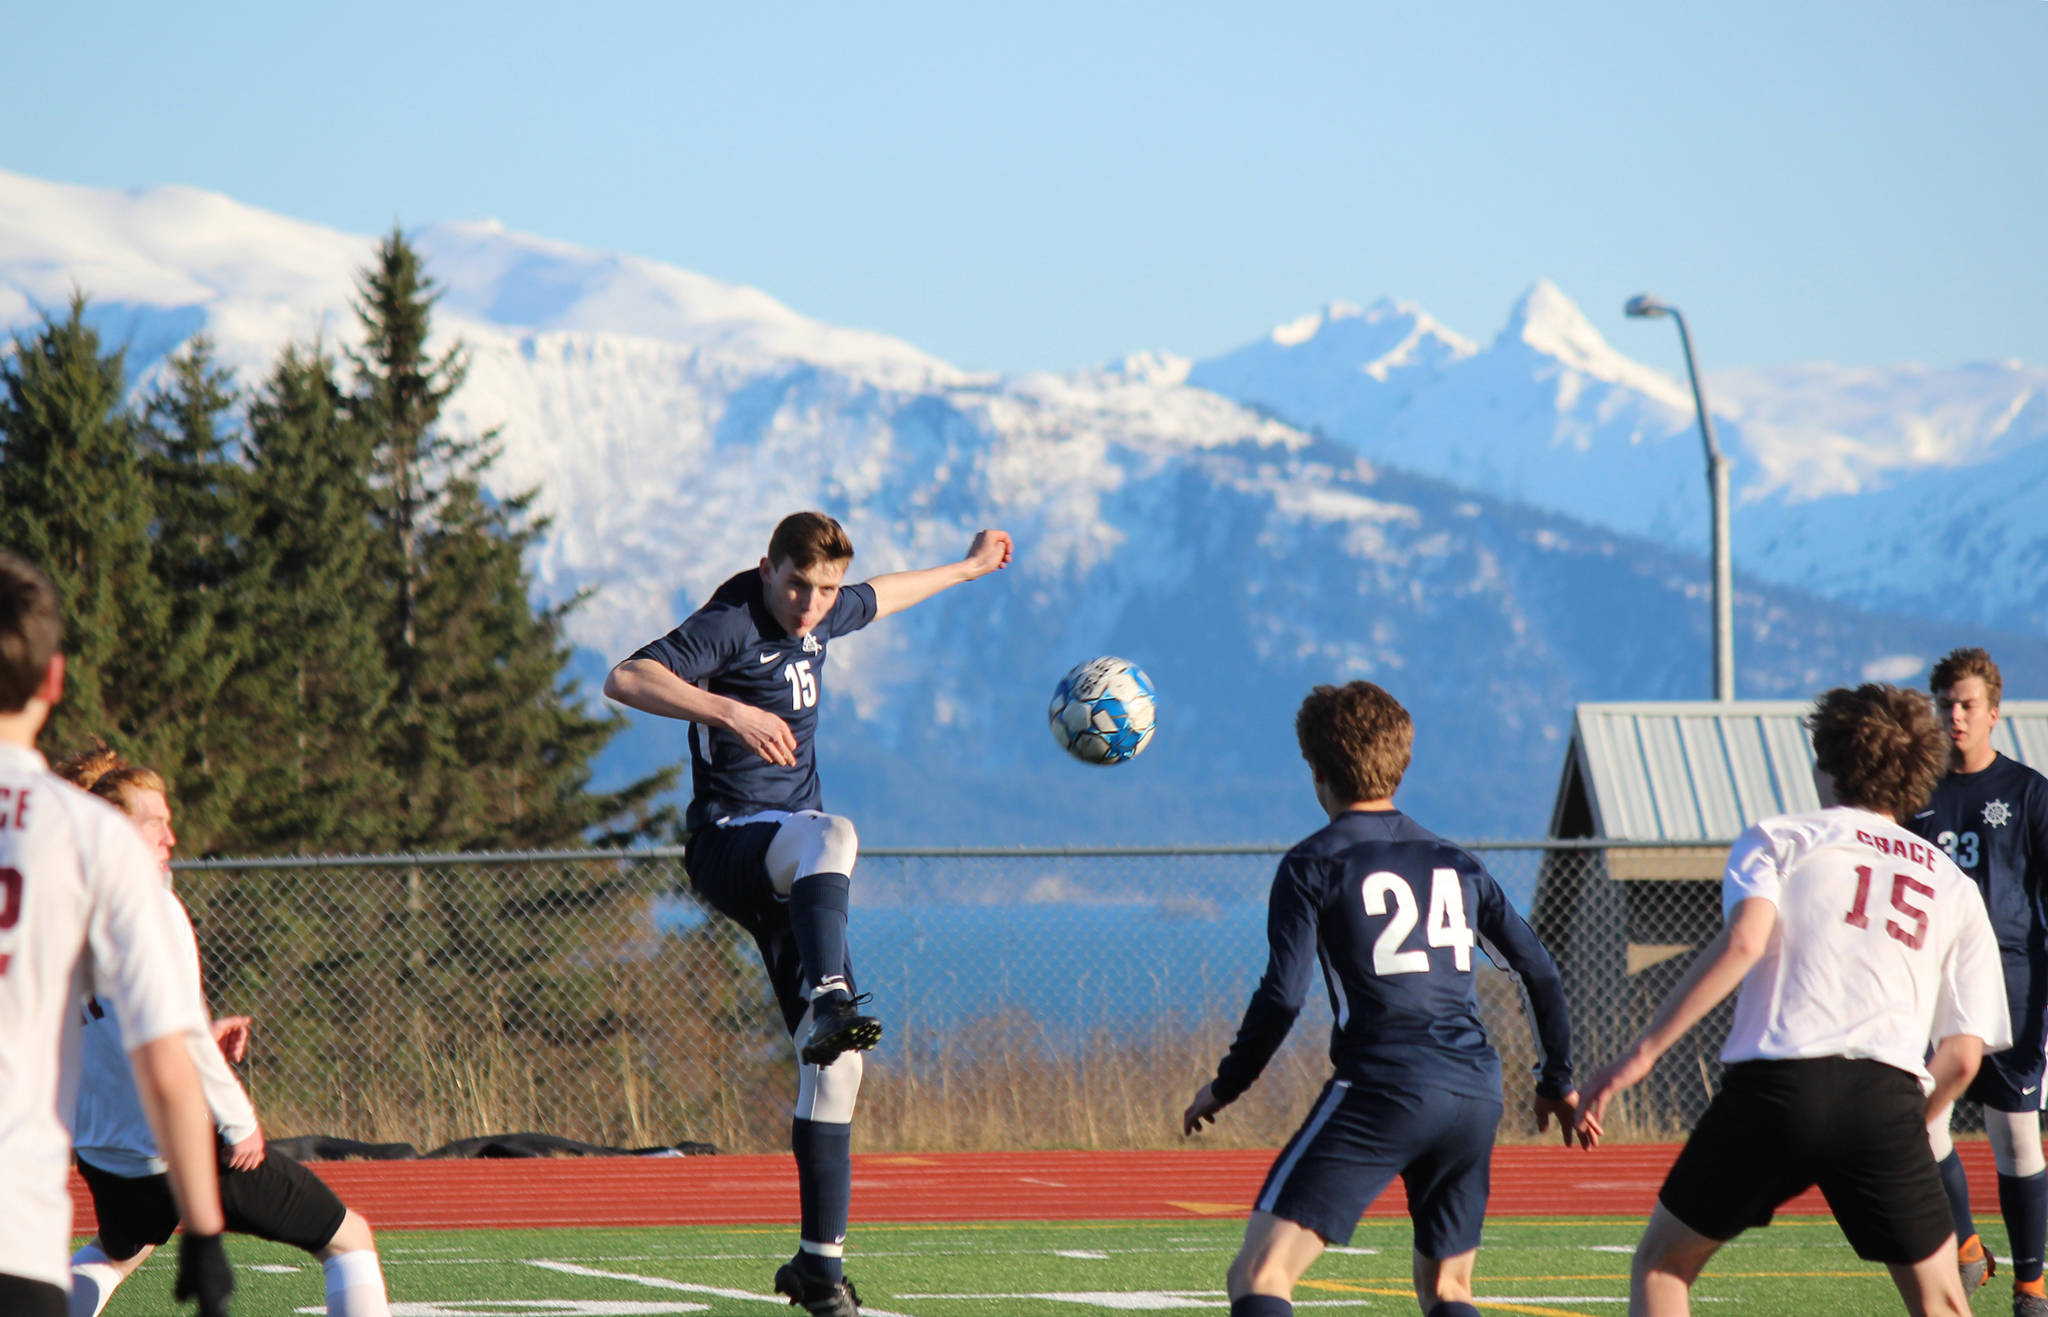 Homer Mariner Ethan Pitzman, 15, keeps the ball in play during Friday’s game against Grace Christian, Friday, April 26, 2019, at the high school in Homer, Alaska while teammates Austin Shafford, 24, and Henry Russell, 33, keep the Grace Christian team at a distance. (Photo by McKibben Jackinsky)